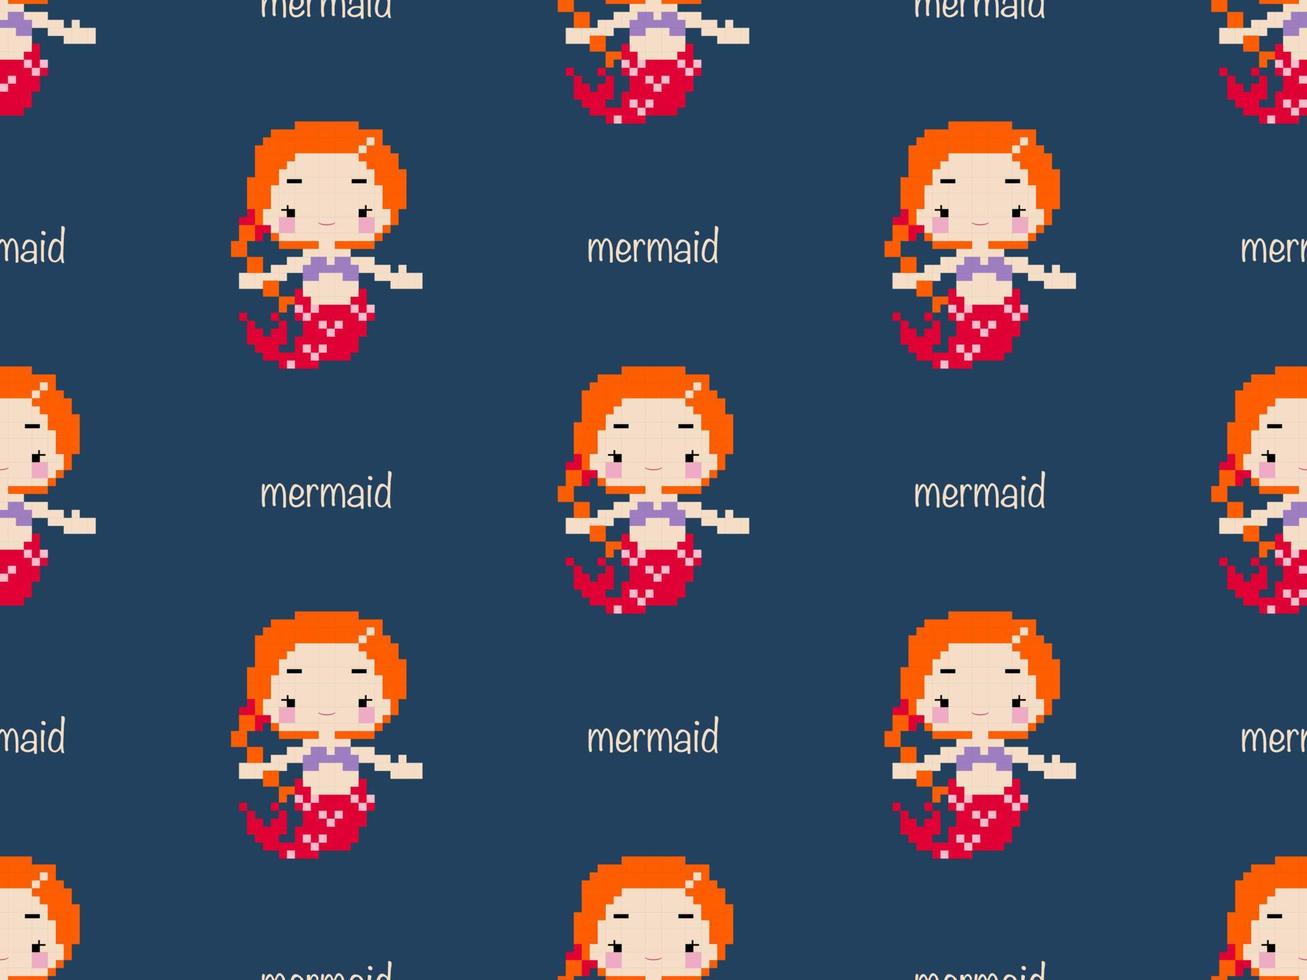 Mermaid cartoon character seamless pattern on blue background.  Pixel style vector